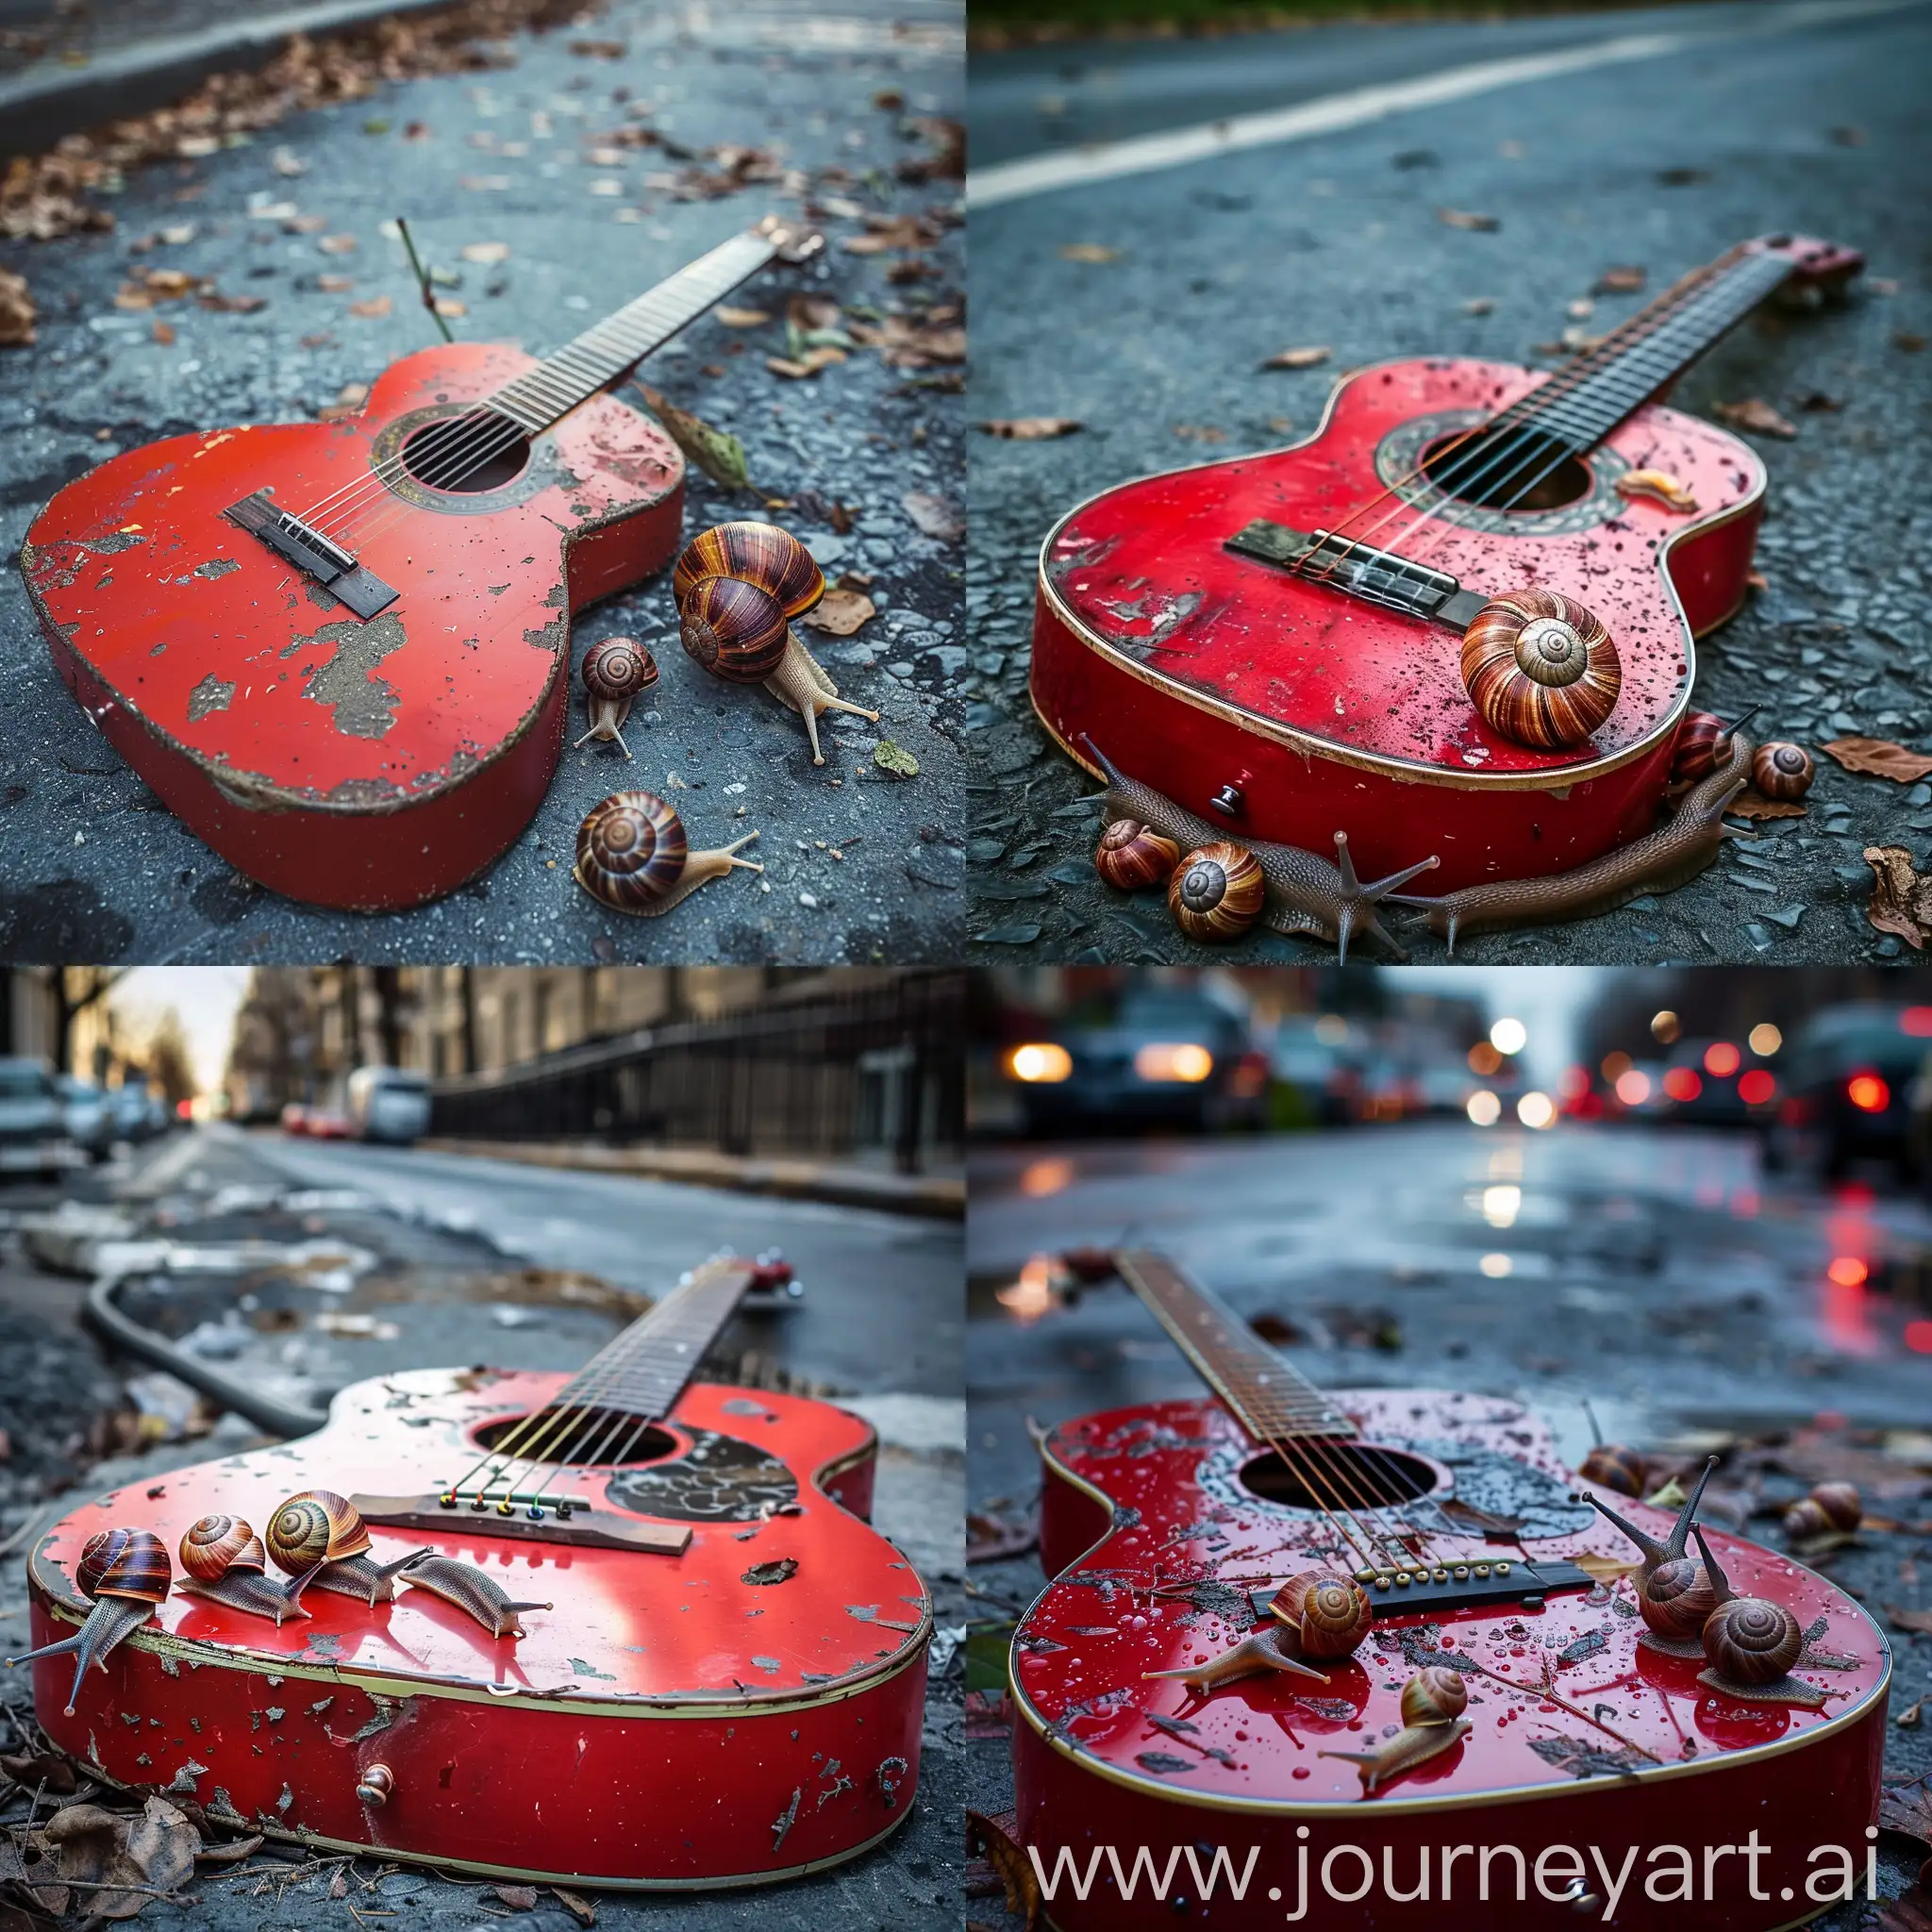 A red guitar is lying on the street. There are snails walking next to the guitar